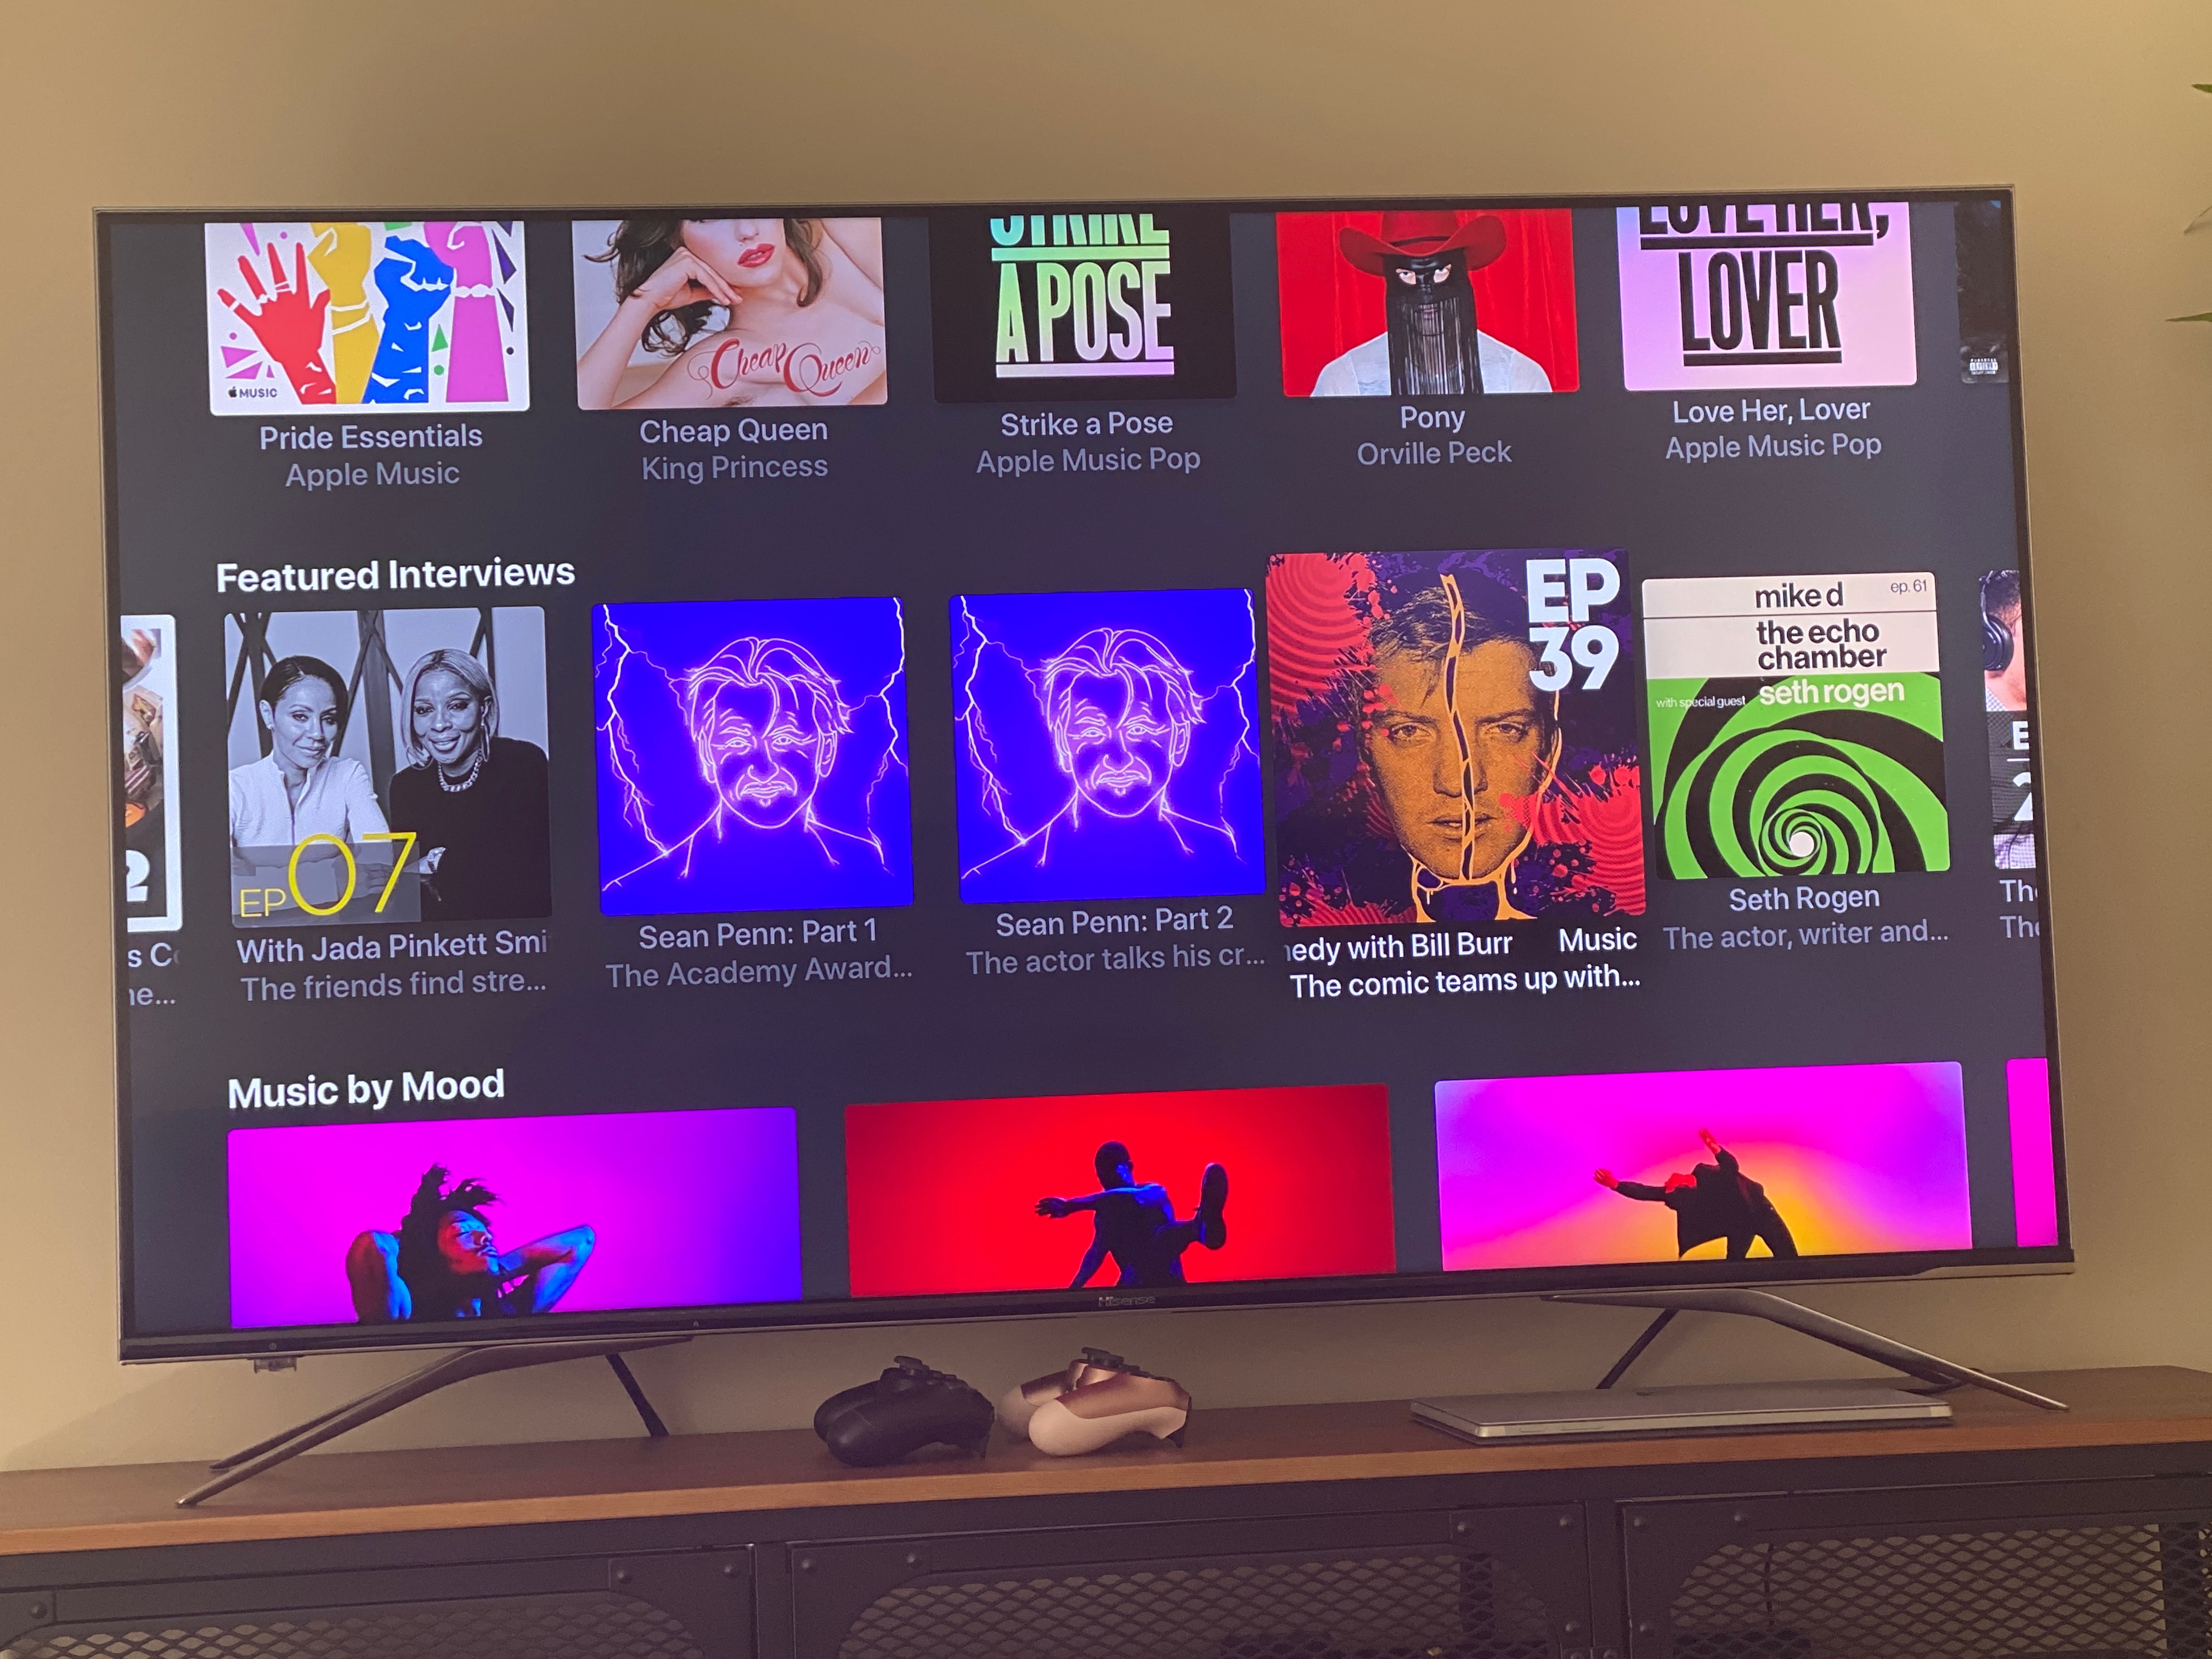 The Apple Music Does Not Work In Apple Tv Apple Community